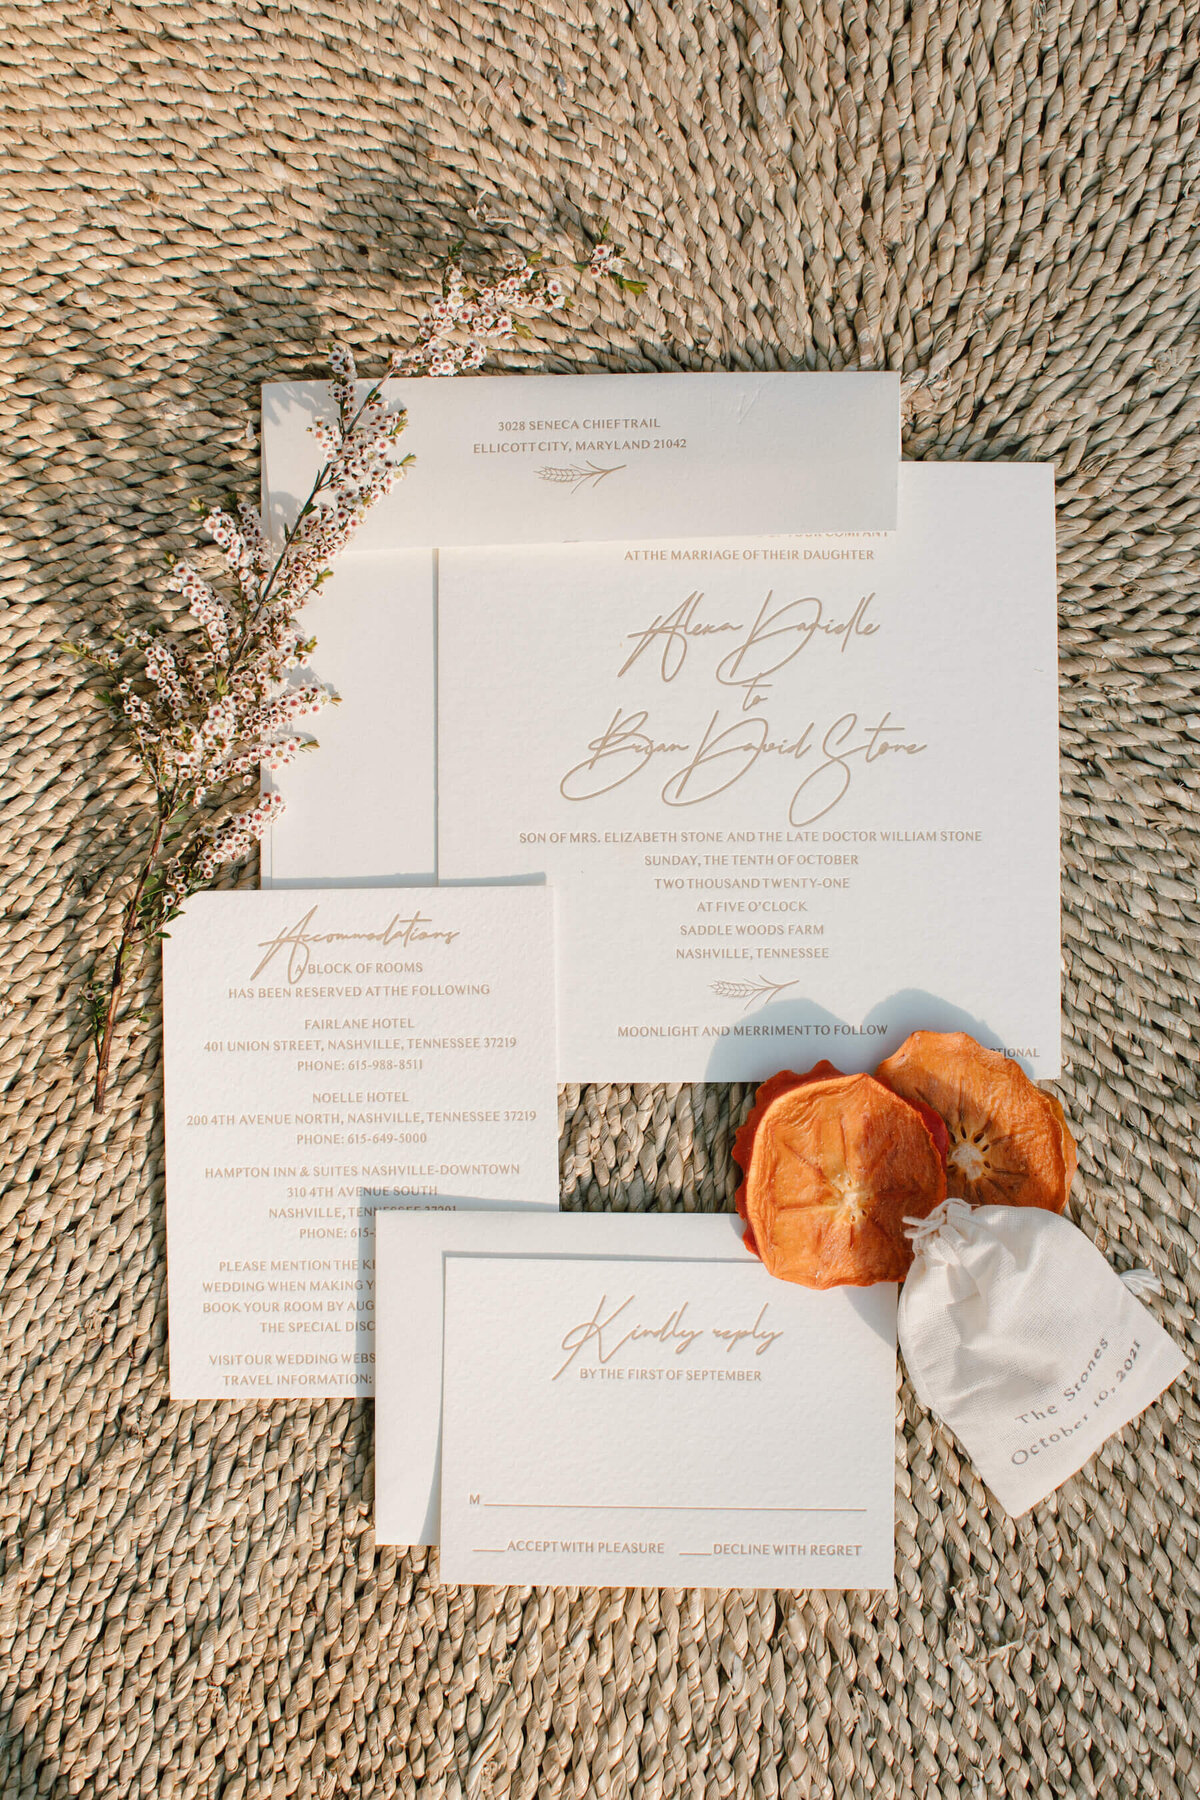 Letterpress wedding invitations with handwritten font for names  on rattan charger